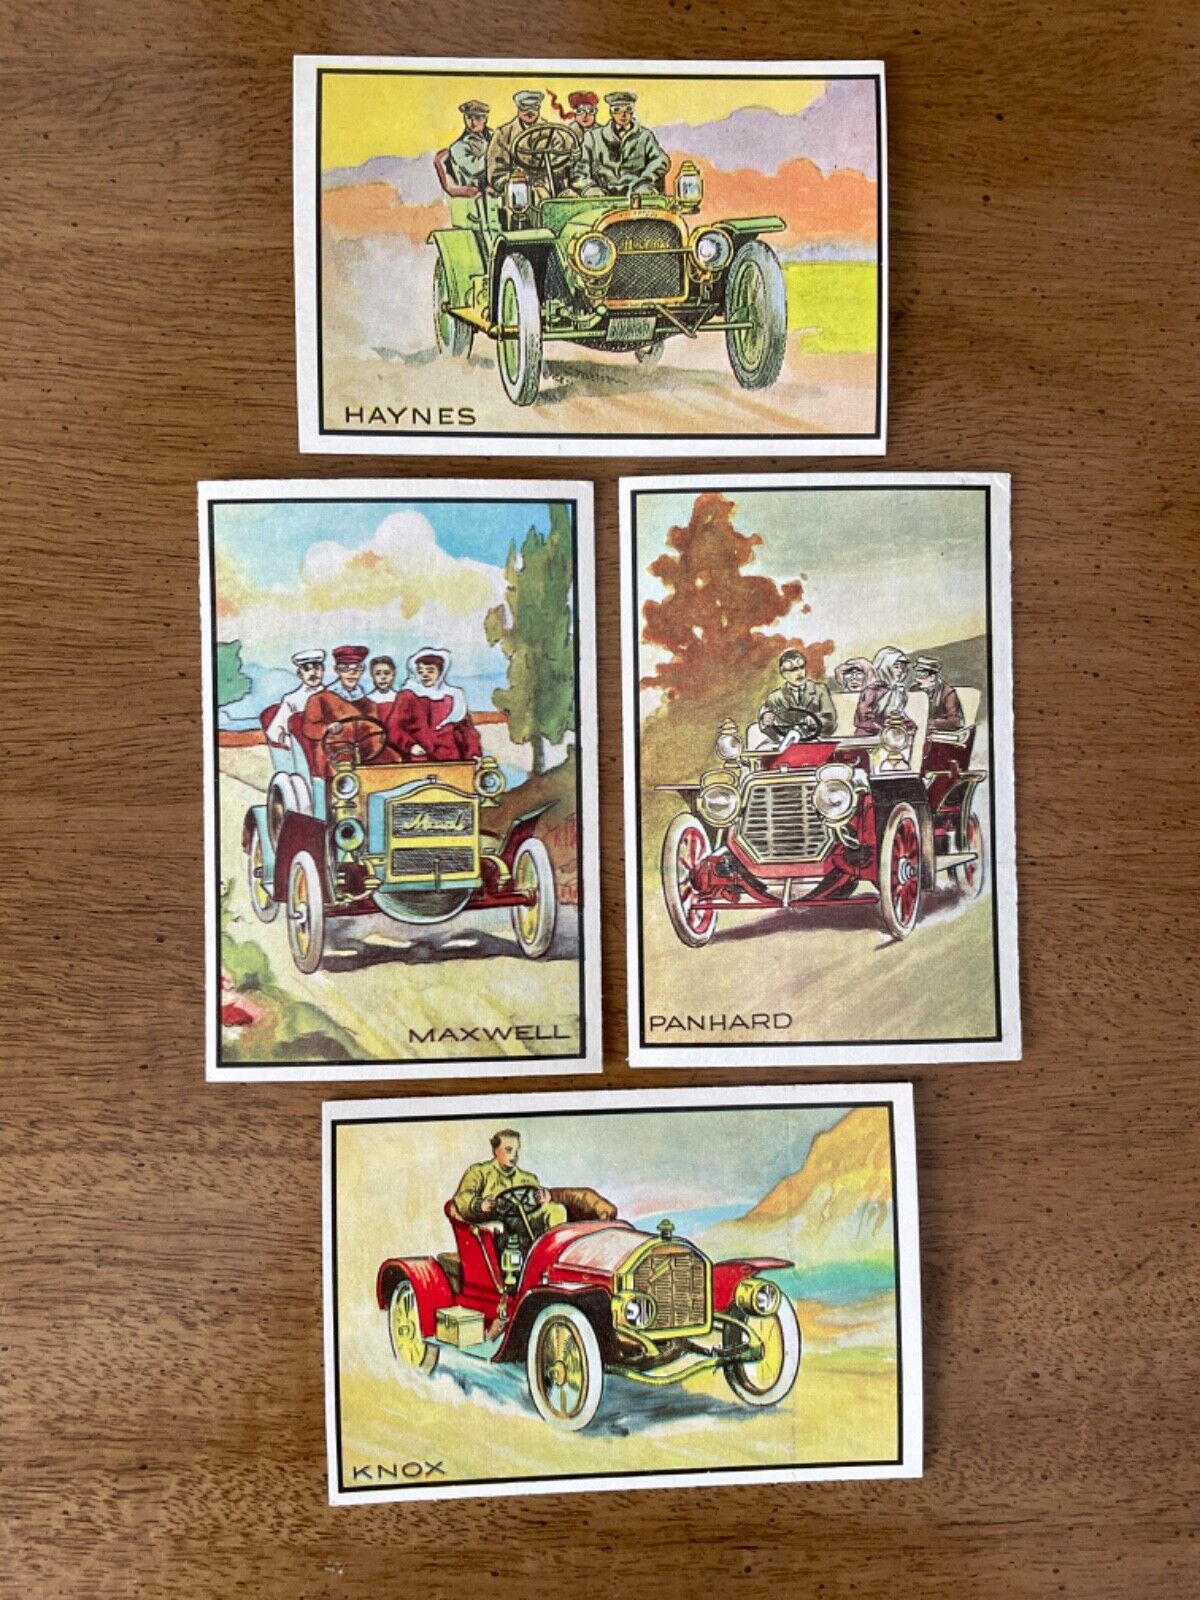 BOWMAN ANTIQUE AUTO TRADING CARS - LOT of 4 - HAYNES - KNOX - MAXWELL - PANHARD